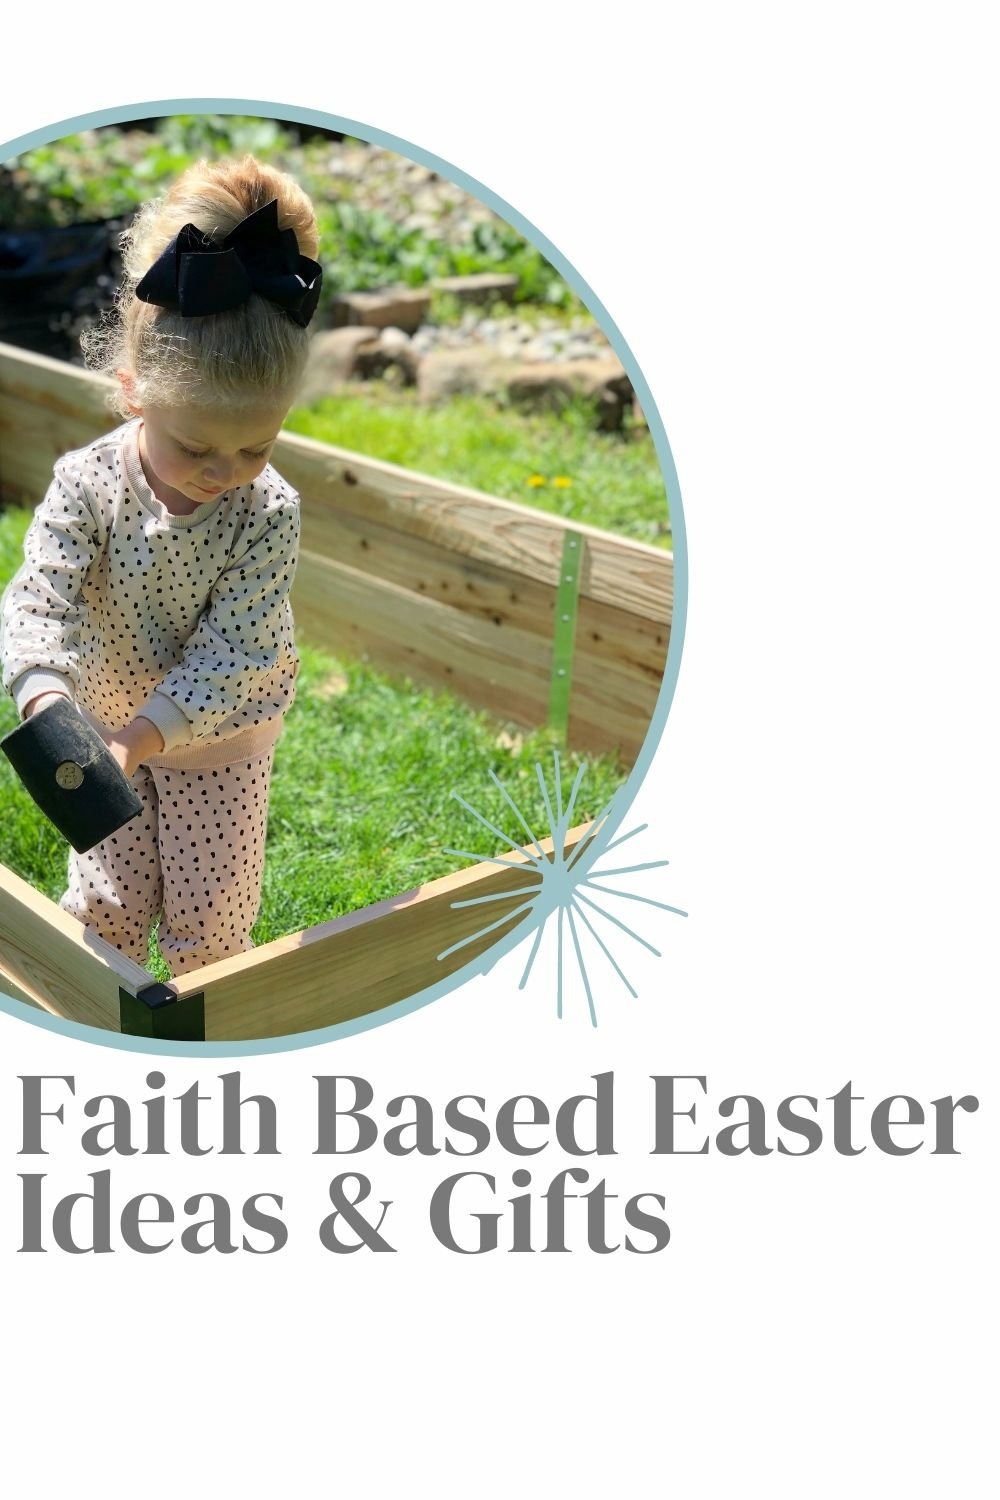 Pin on Faith Based Gifts